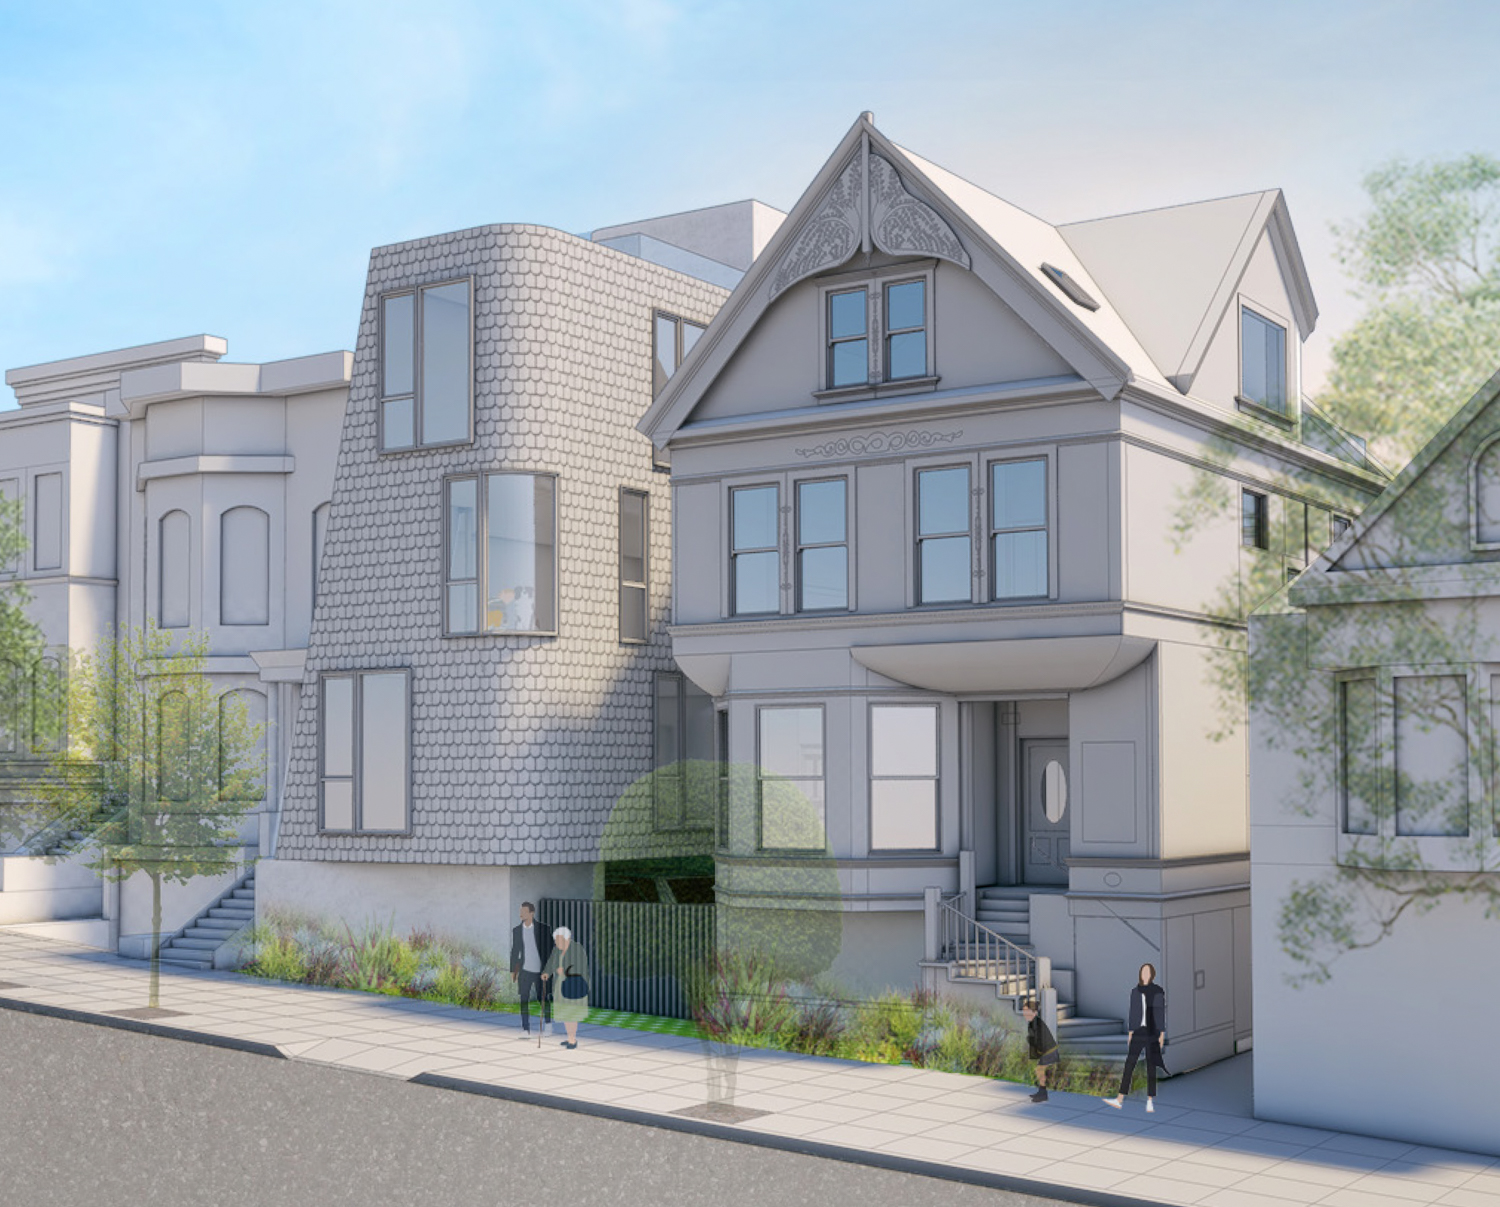 2471 and 2477 Washington Street looking southeast, rendering by Jensen Architects